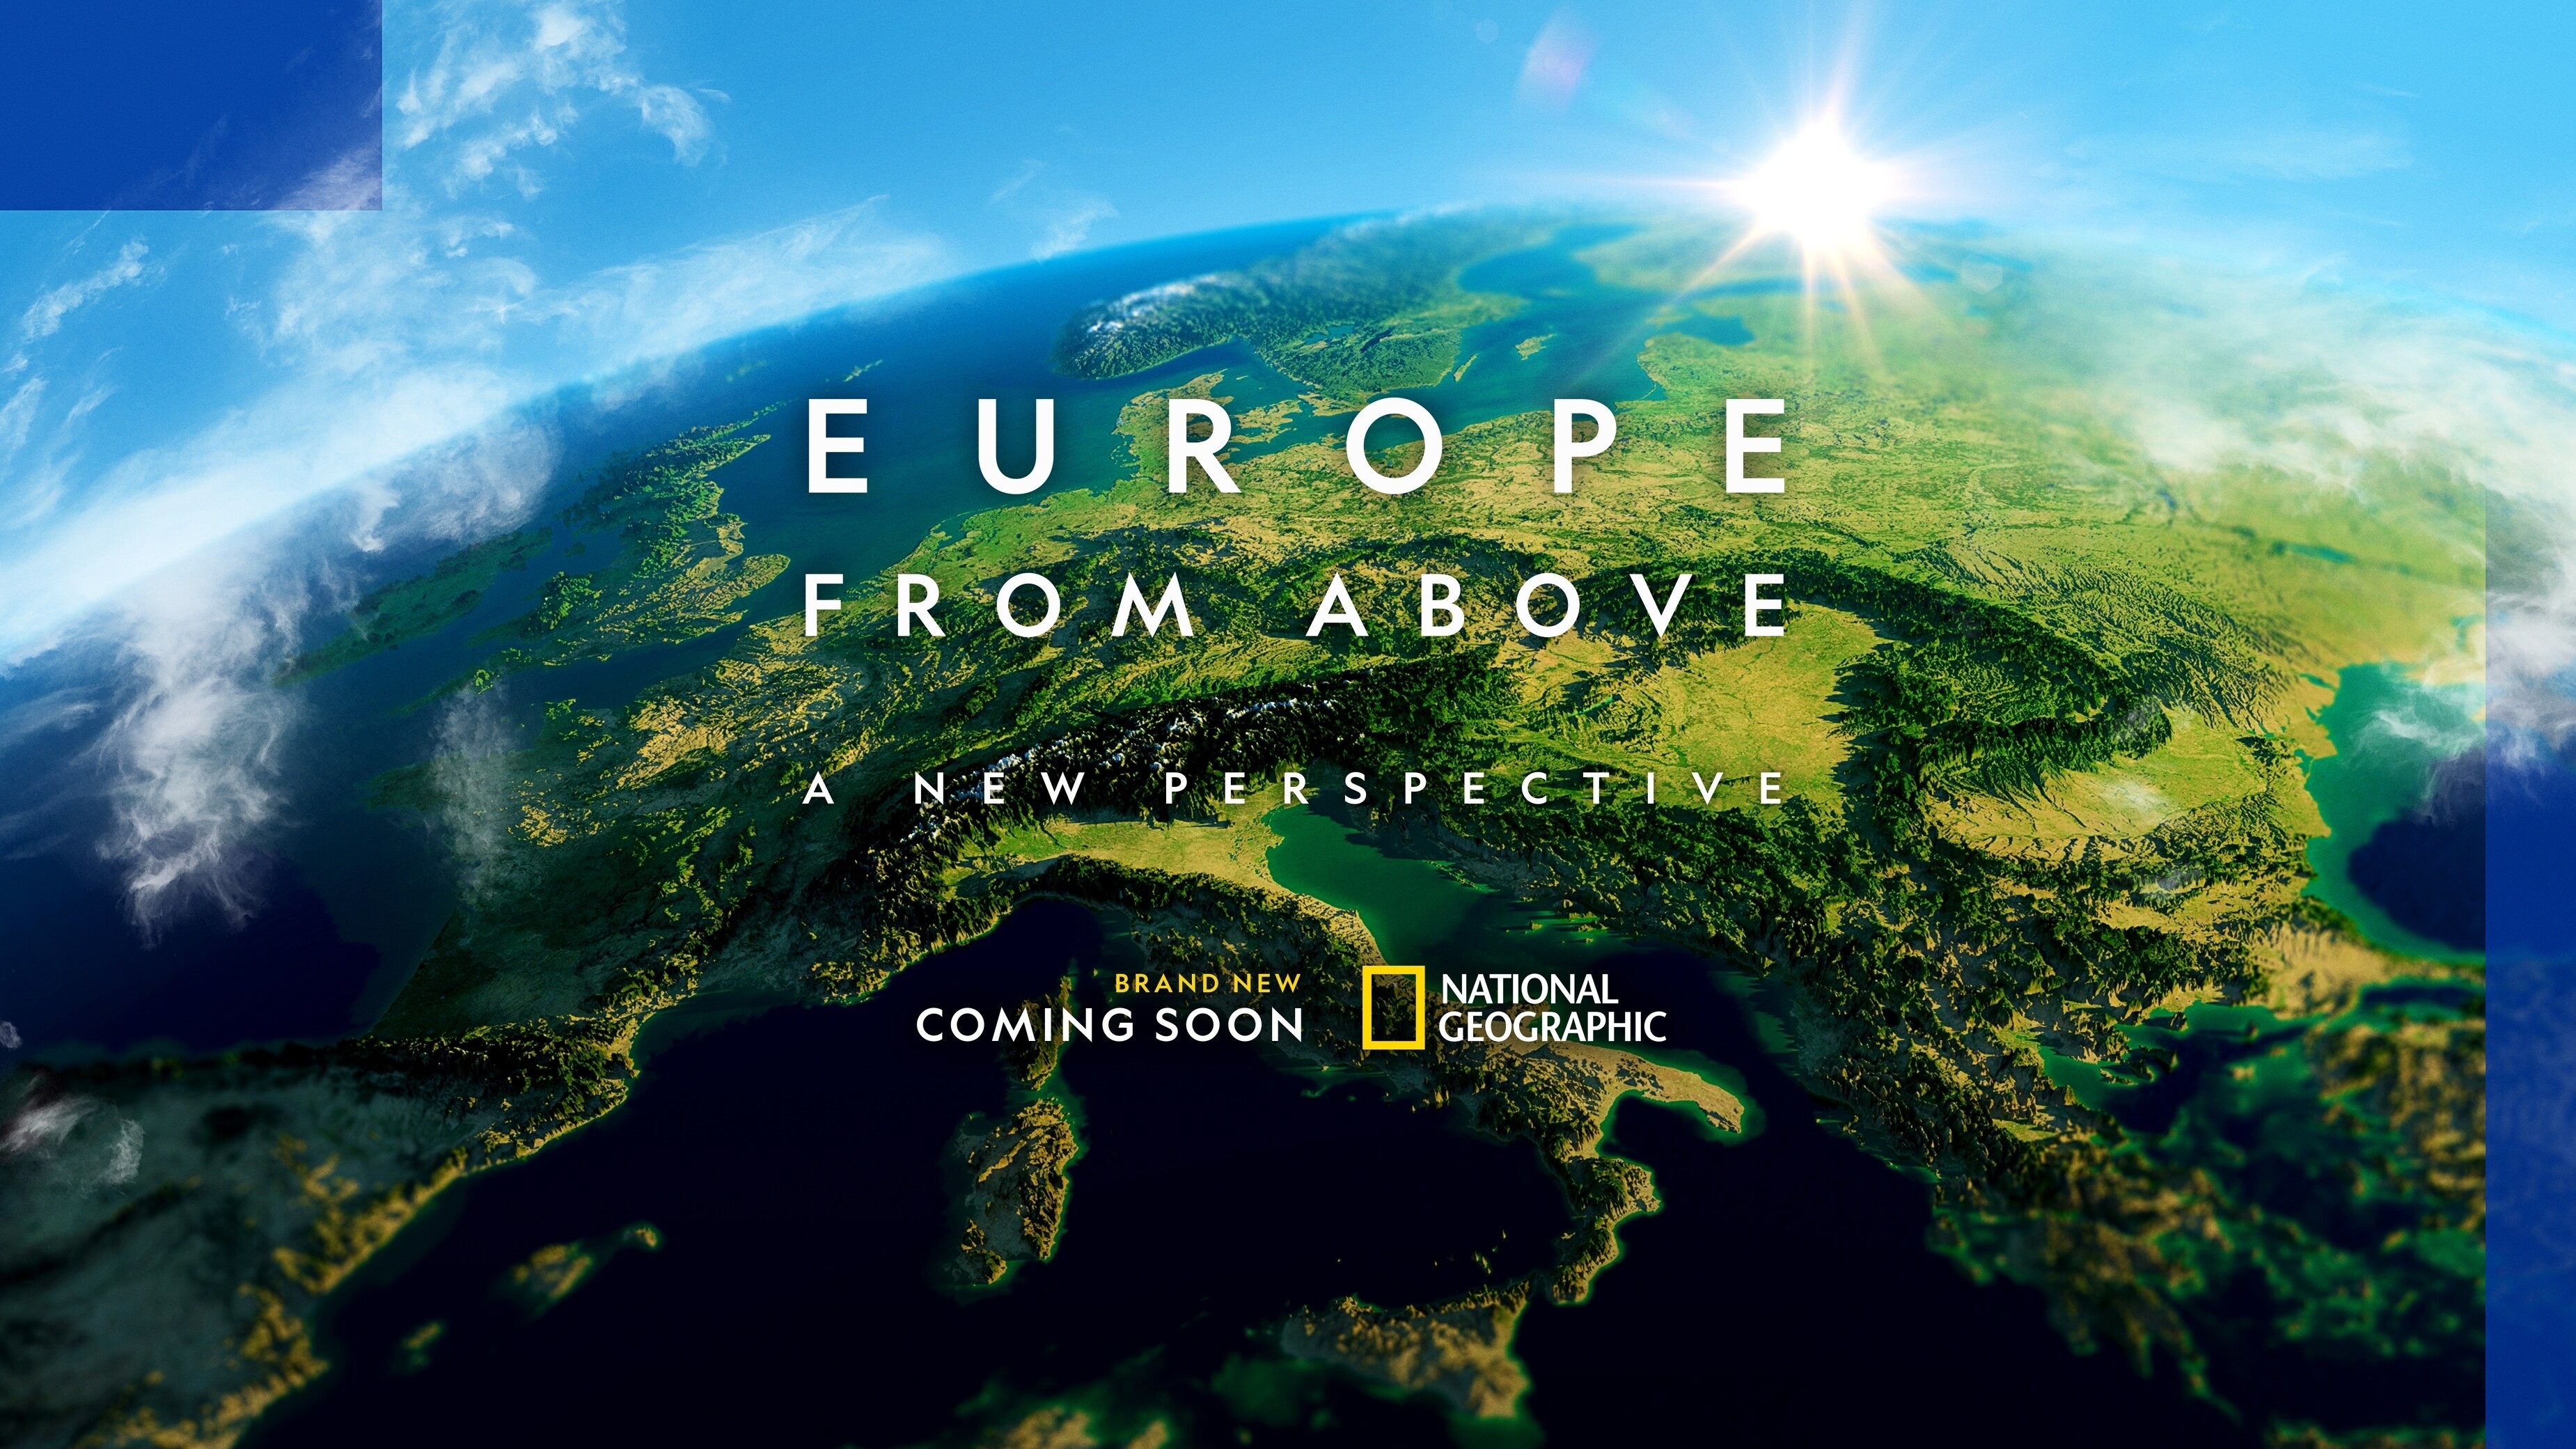 NATIONAL GEOGRAPHIC TAKES TO THE SKIES AGAIN TO SHARE MORE SPECTACULAR AERIAL VIEWS OF THE CONTINENT IN SEASON THREE OF ‘EUROPE FROM ABOVE’